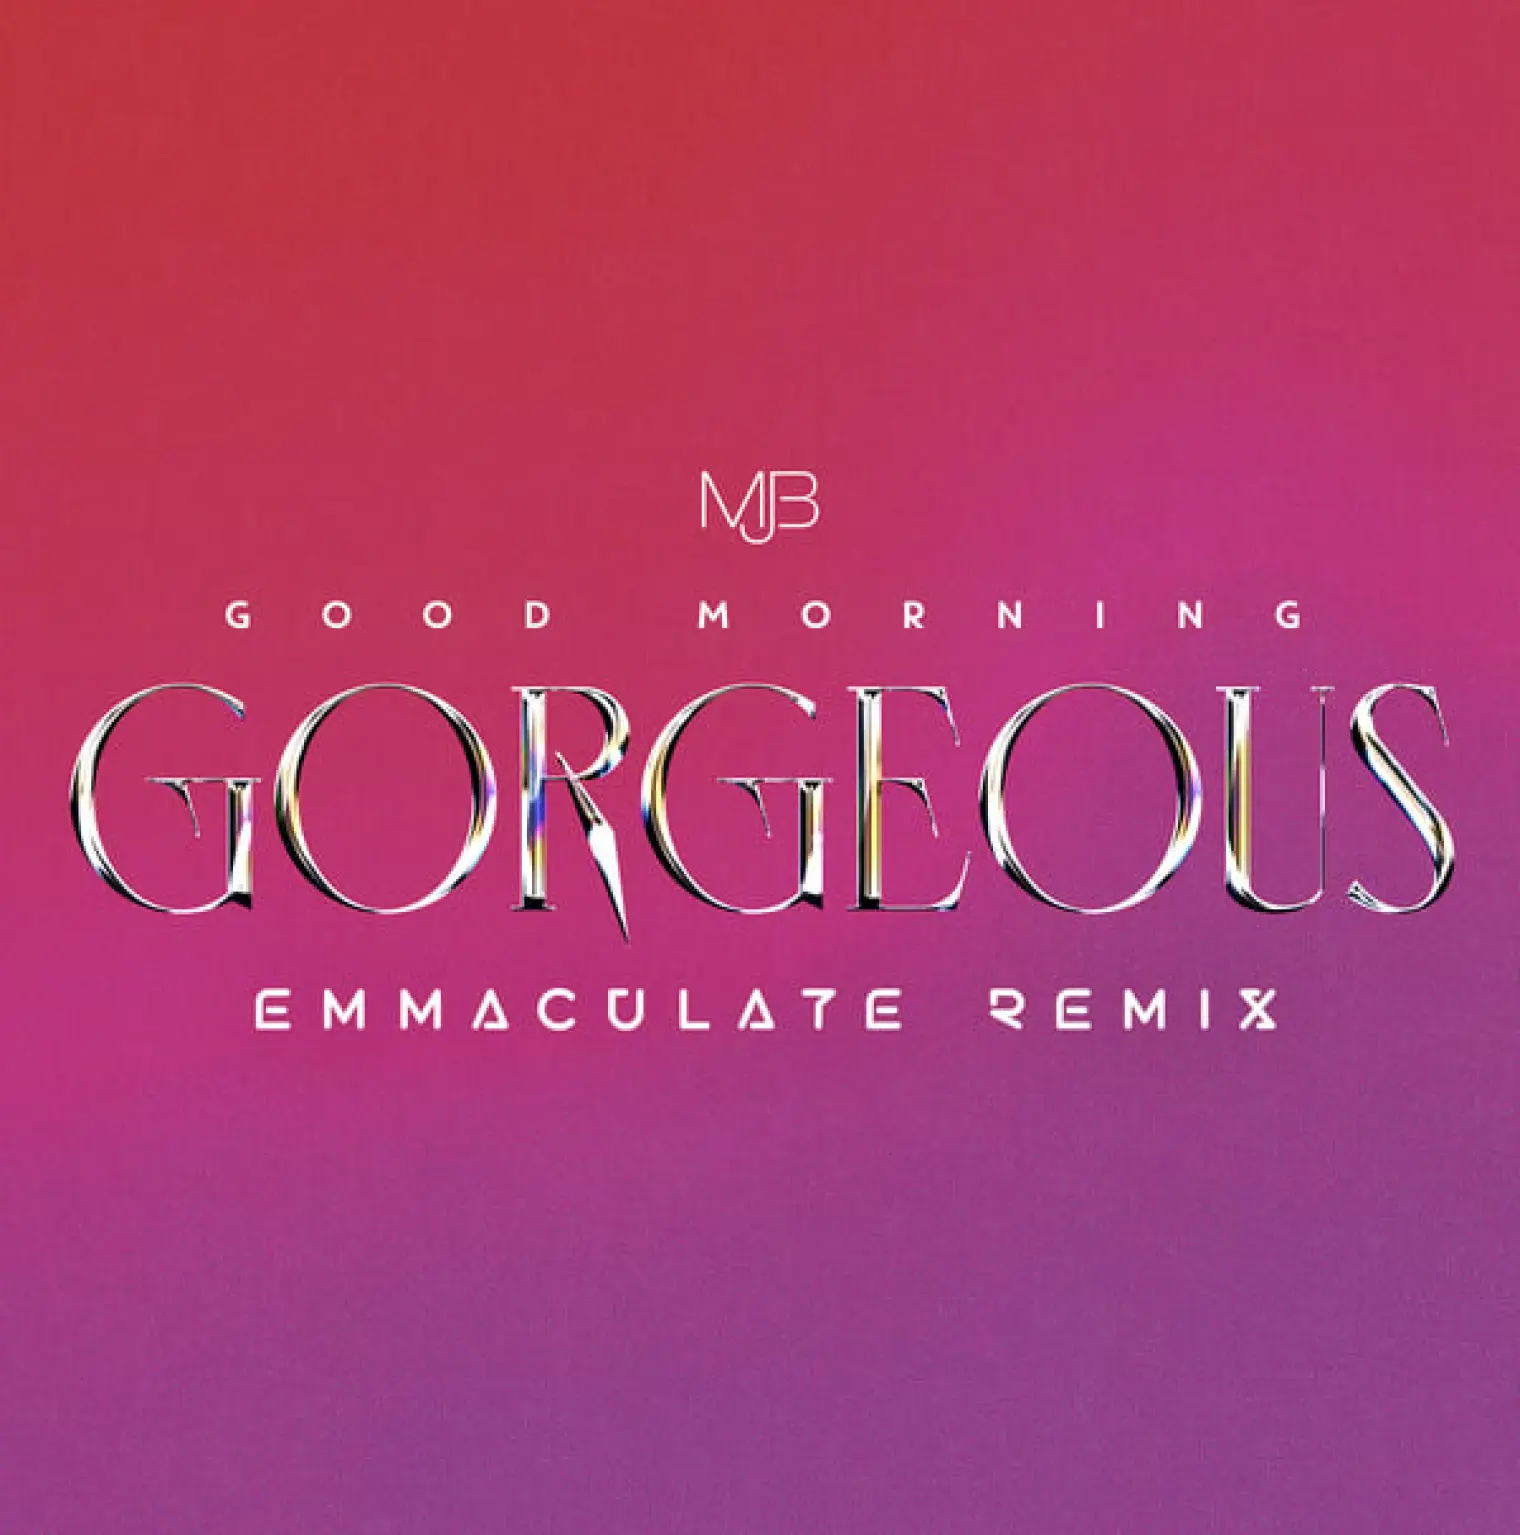 Good Morning Gorgeous (Emmaculate Remix) -  Mary J. Blige 